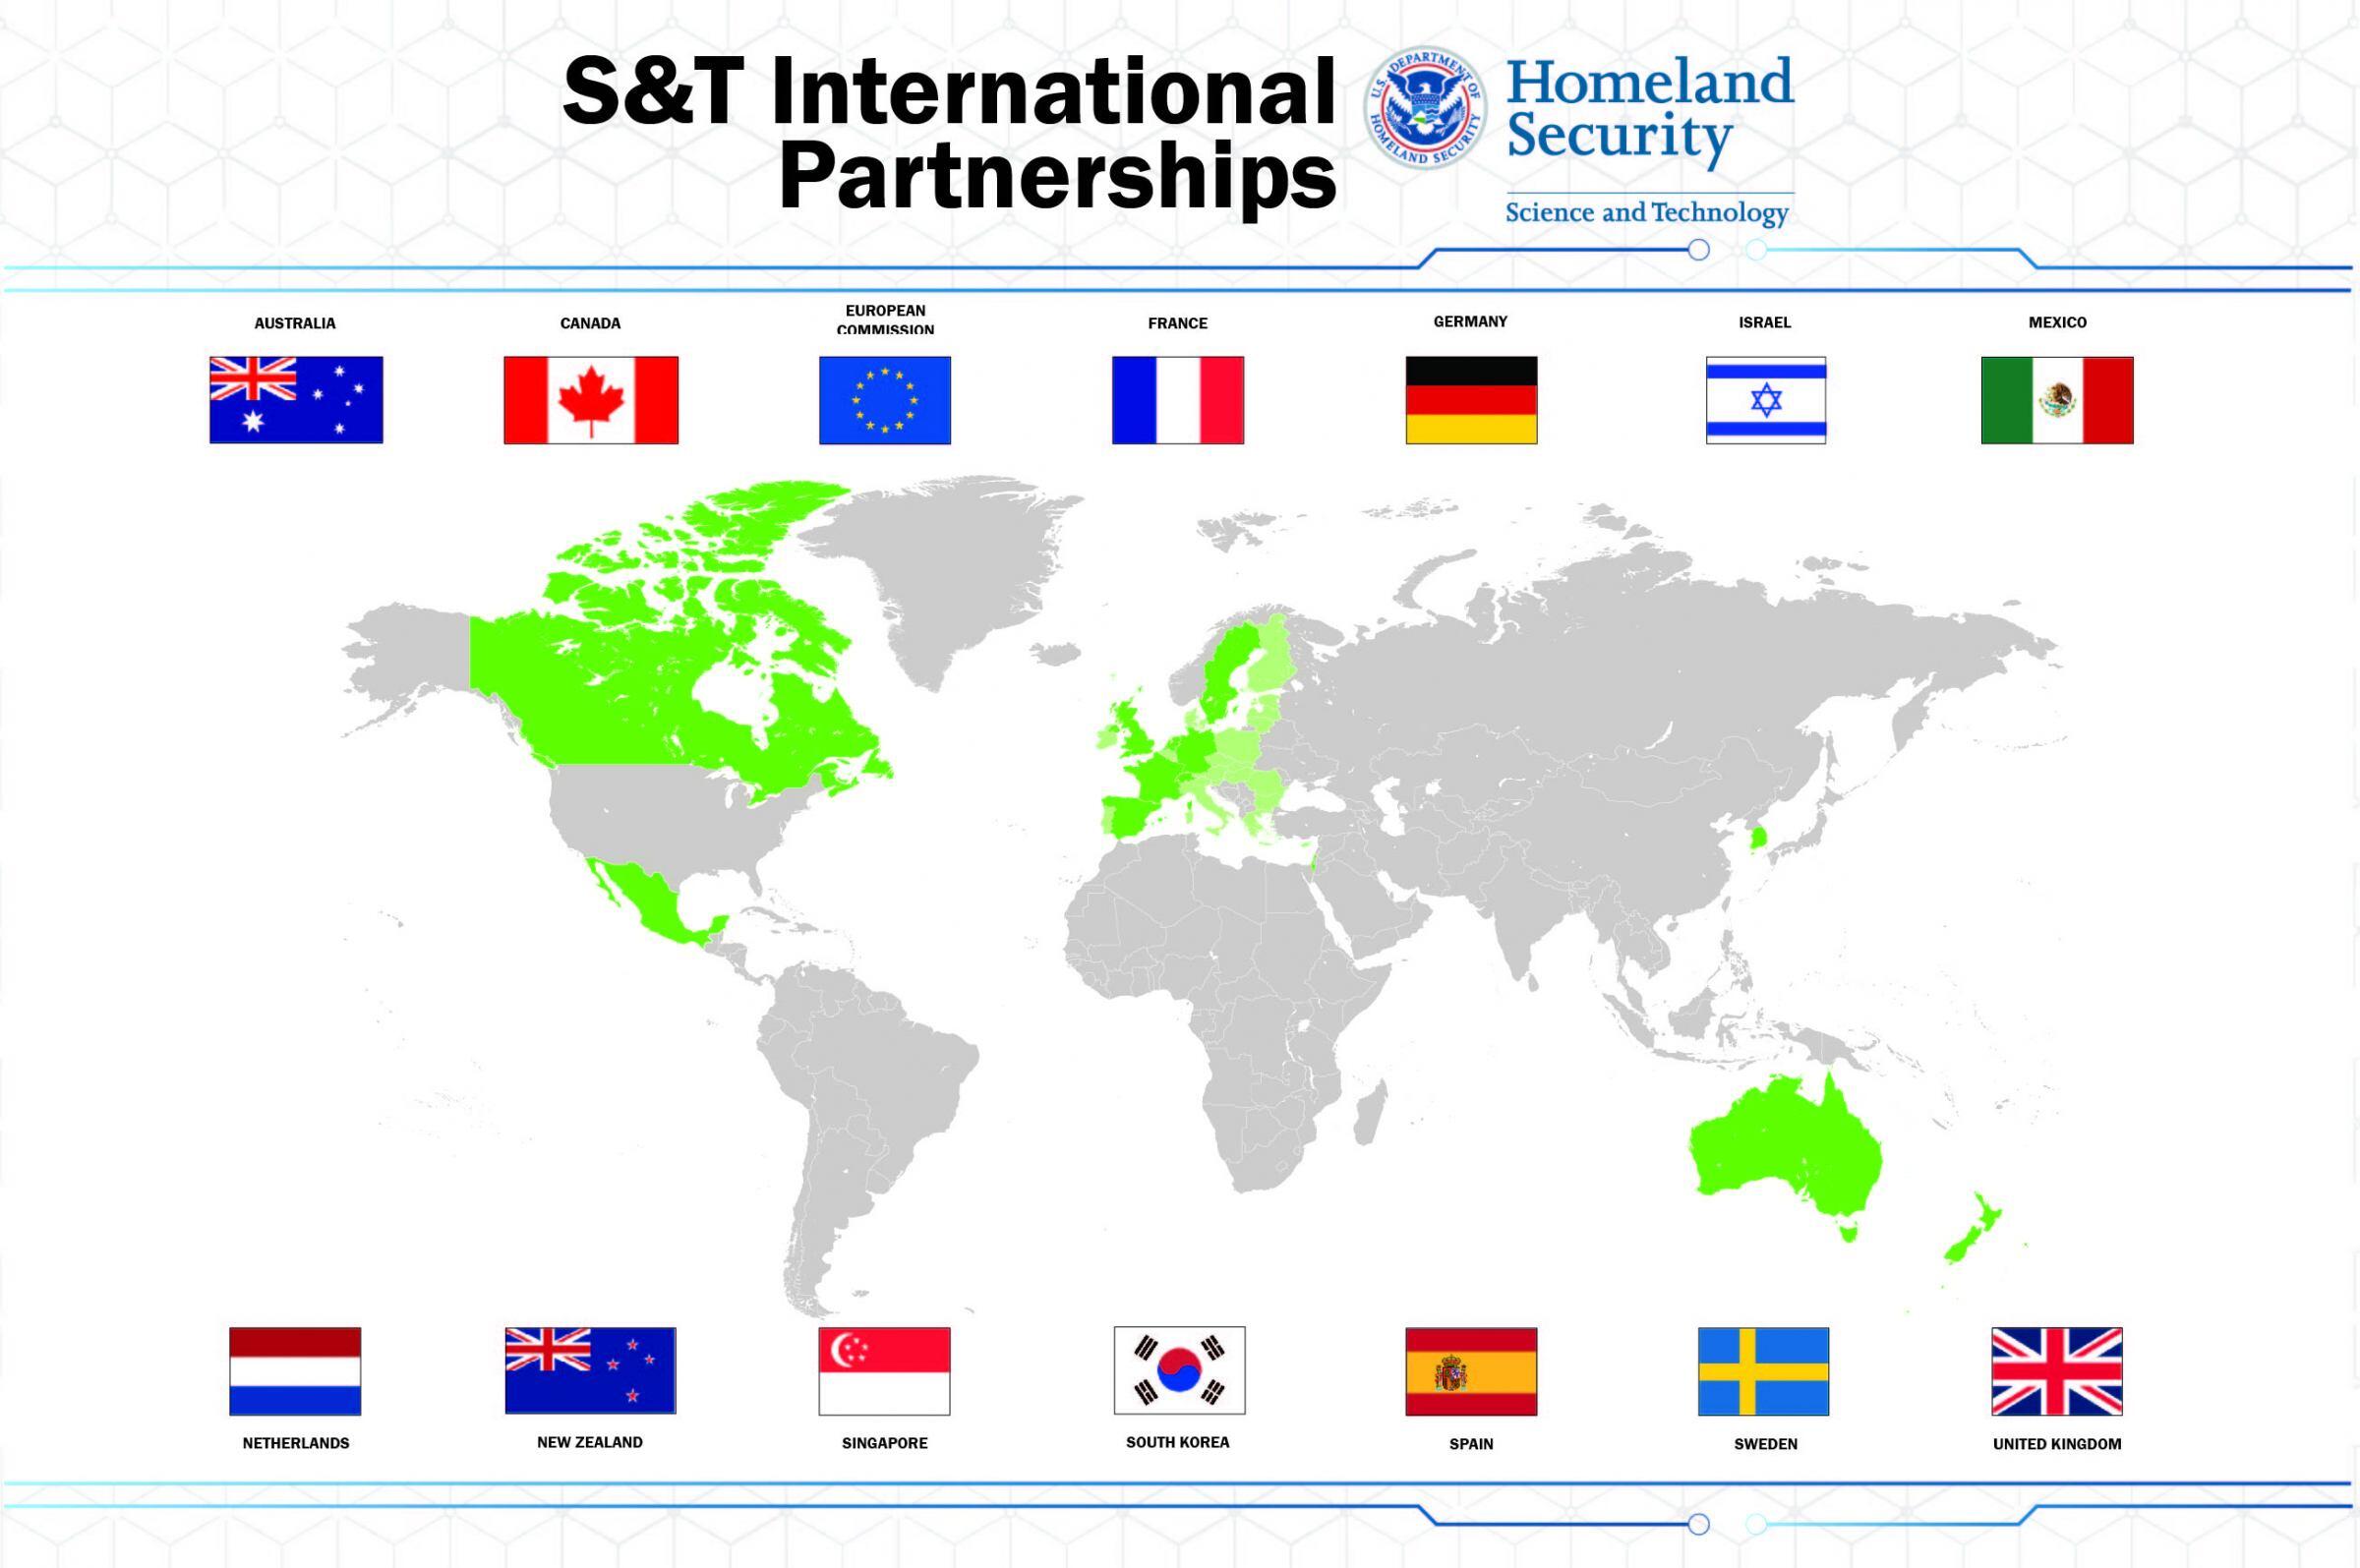 Map showing S&T international partnerships highlighted in green along with maps: Australia, Canada, European Commission, France, Germany, Israel, Mexico, Netherlands, New Zealand, Singapore, South Korea, Spain, Sweden, and United Kingdom.